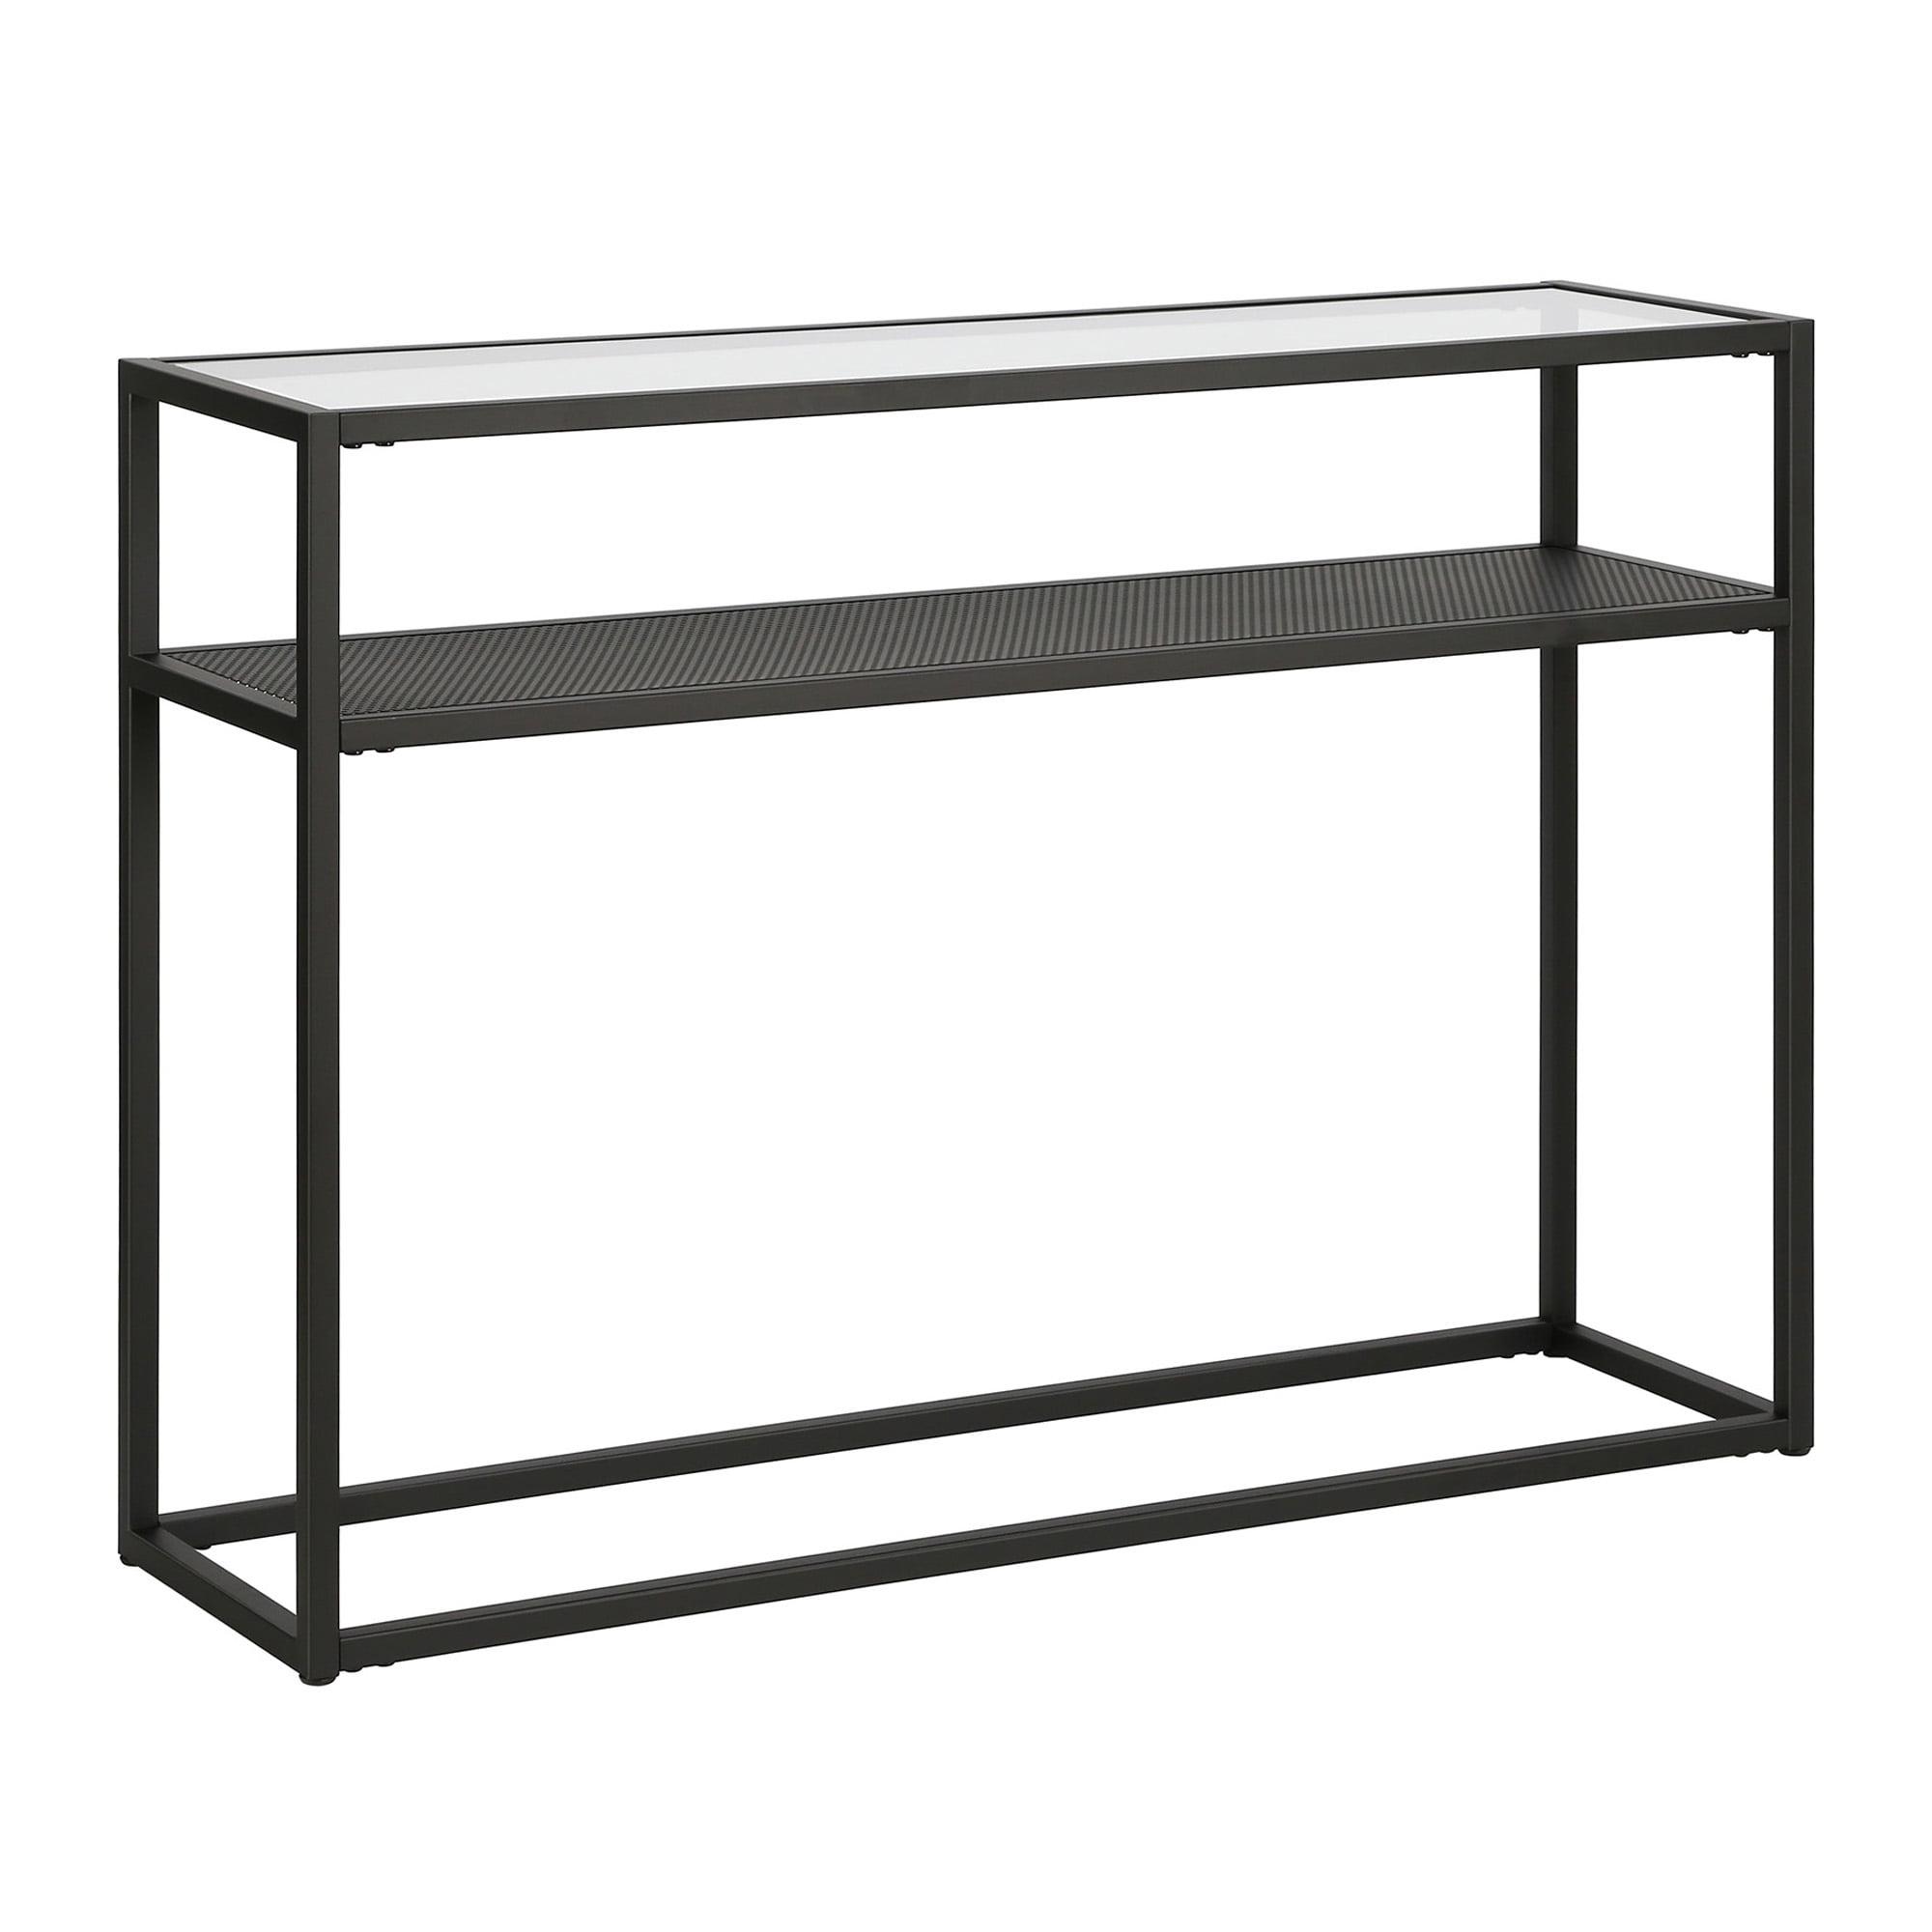 Wood Console Table With Glass Top, Black Metal Sofa Table With Glass Top